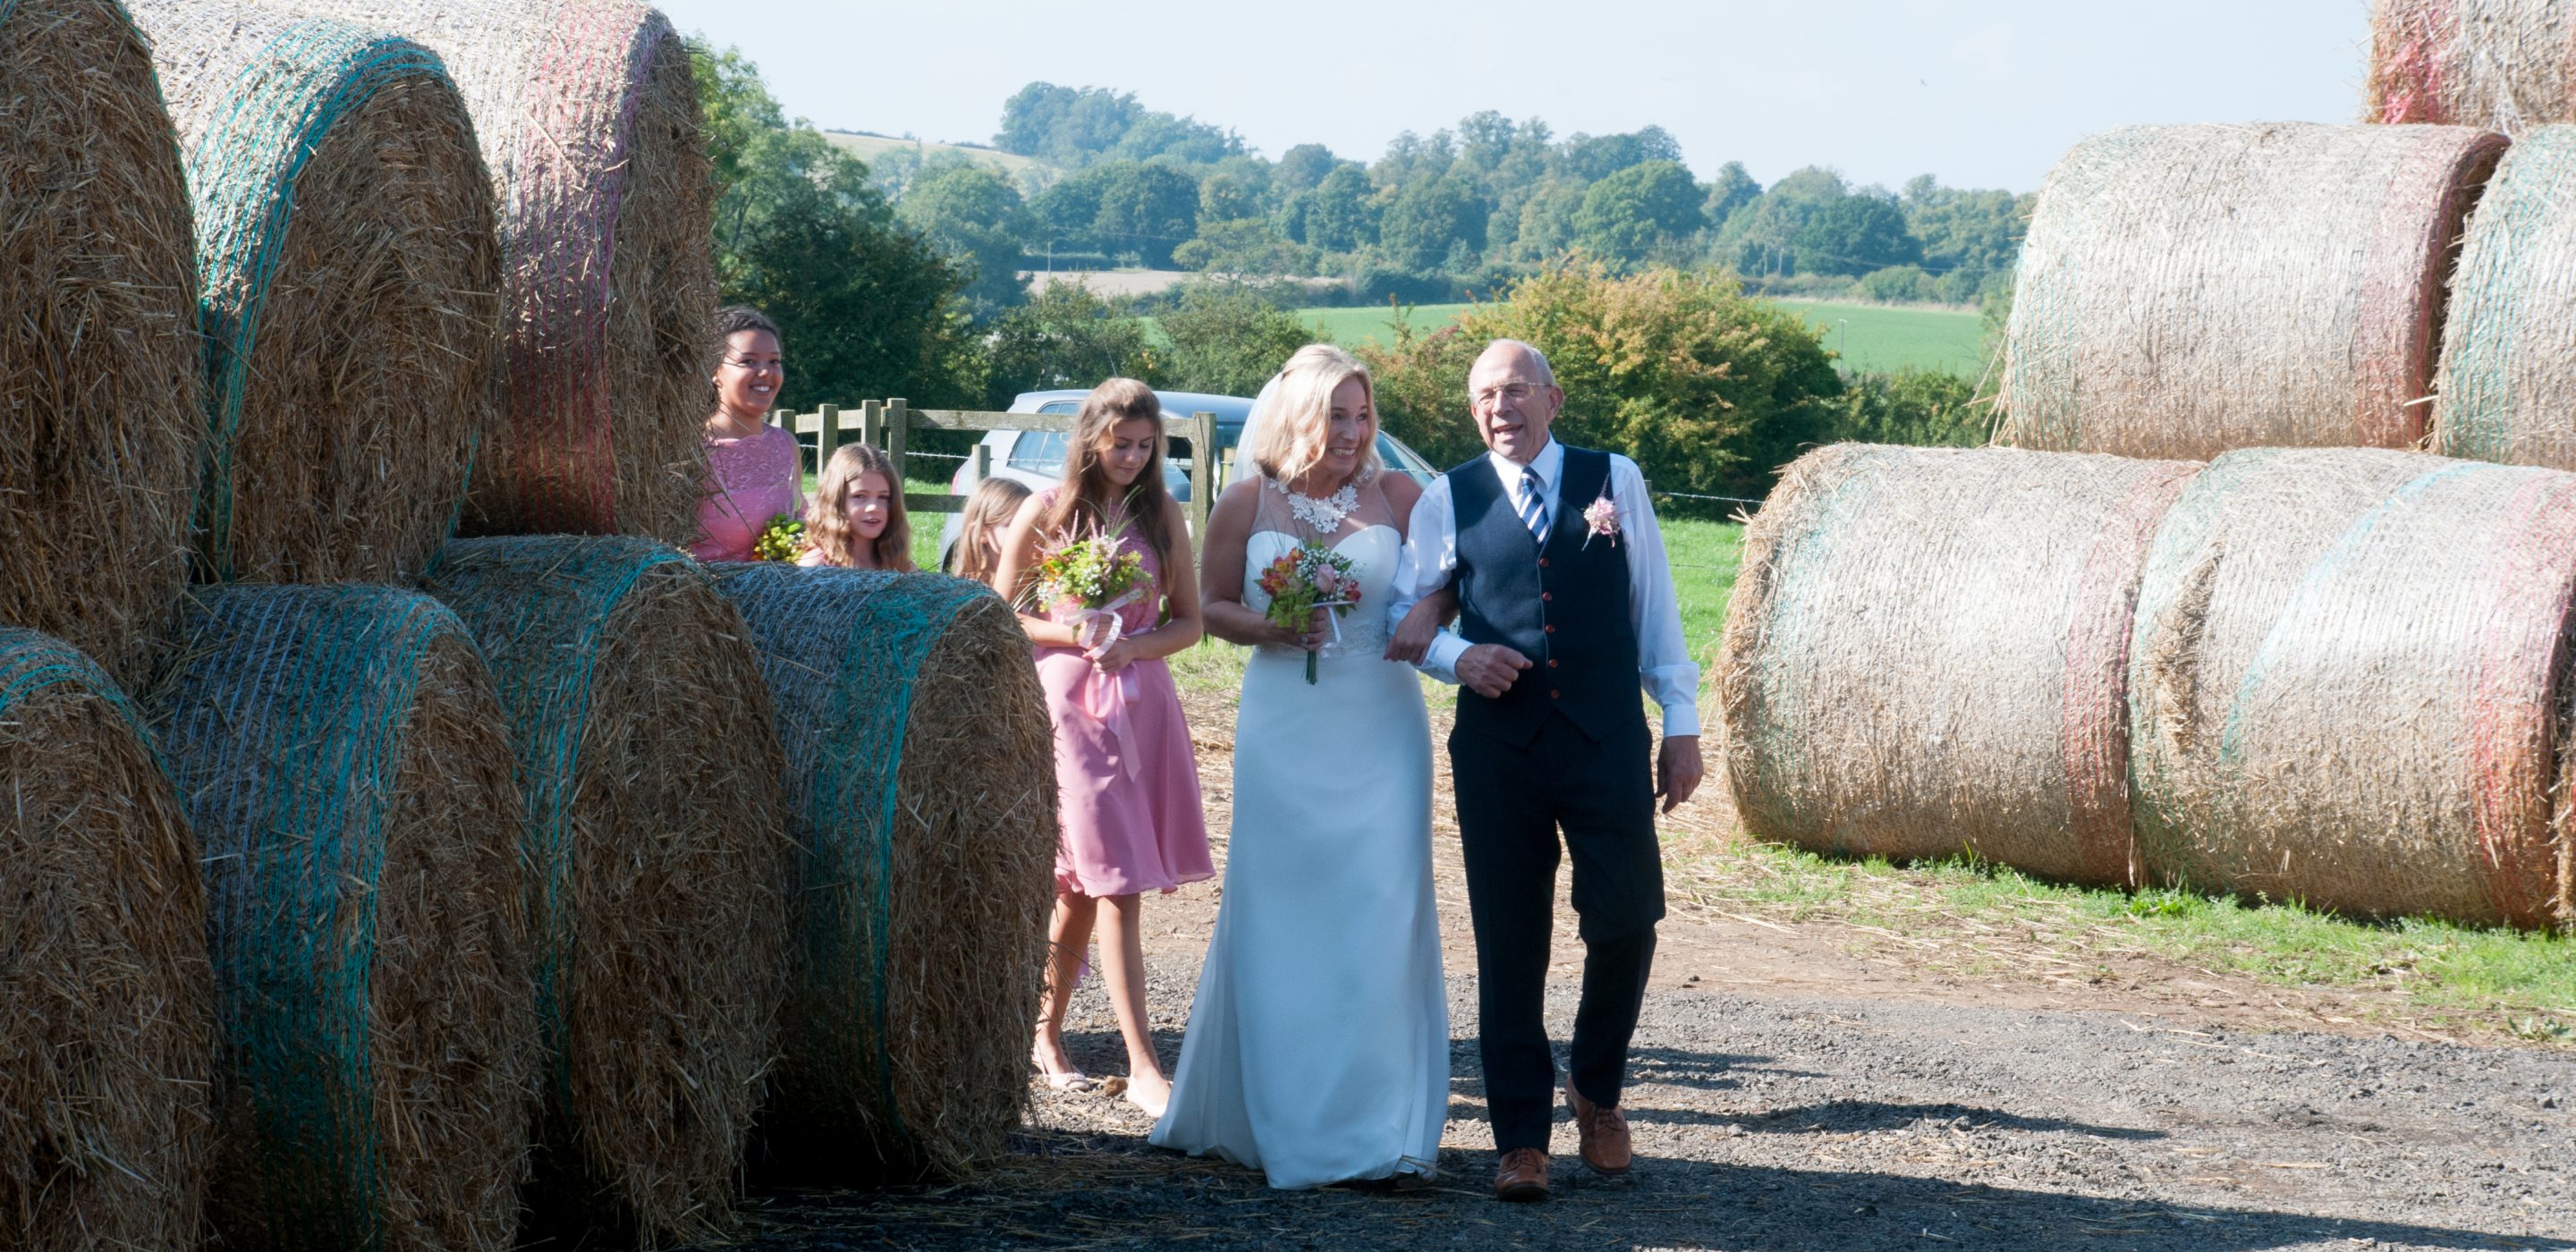 Wood Farm, an exciting new venture and collaboration, wedding photography, northamptonshire